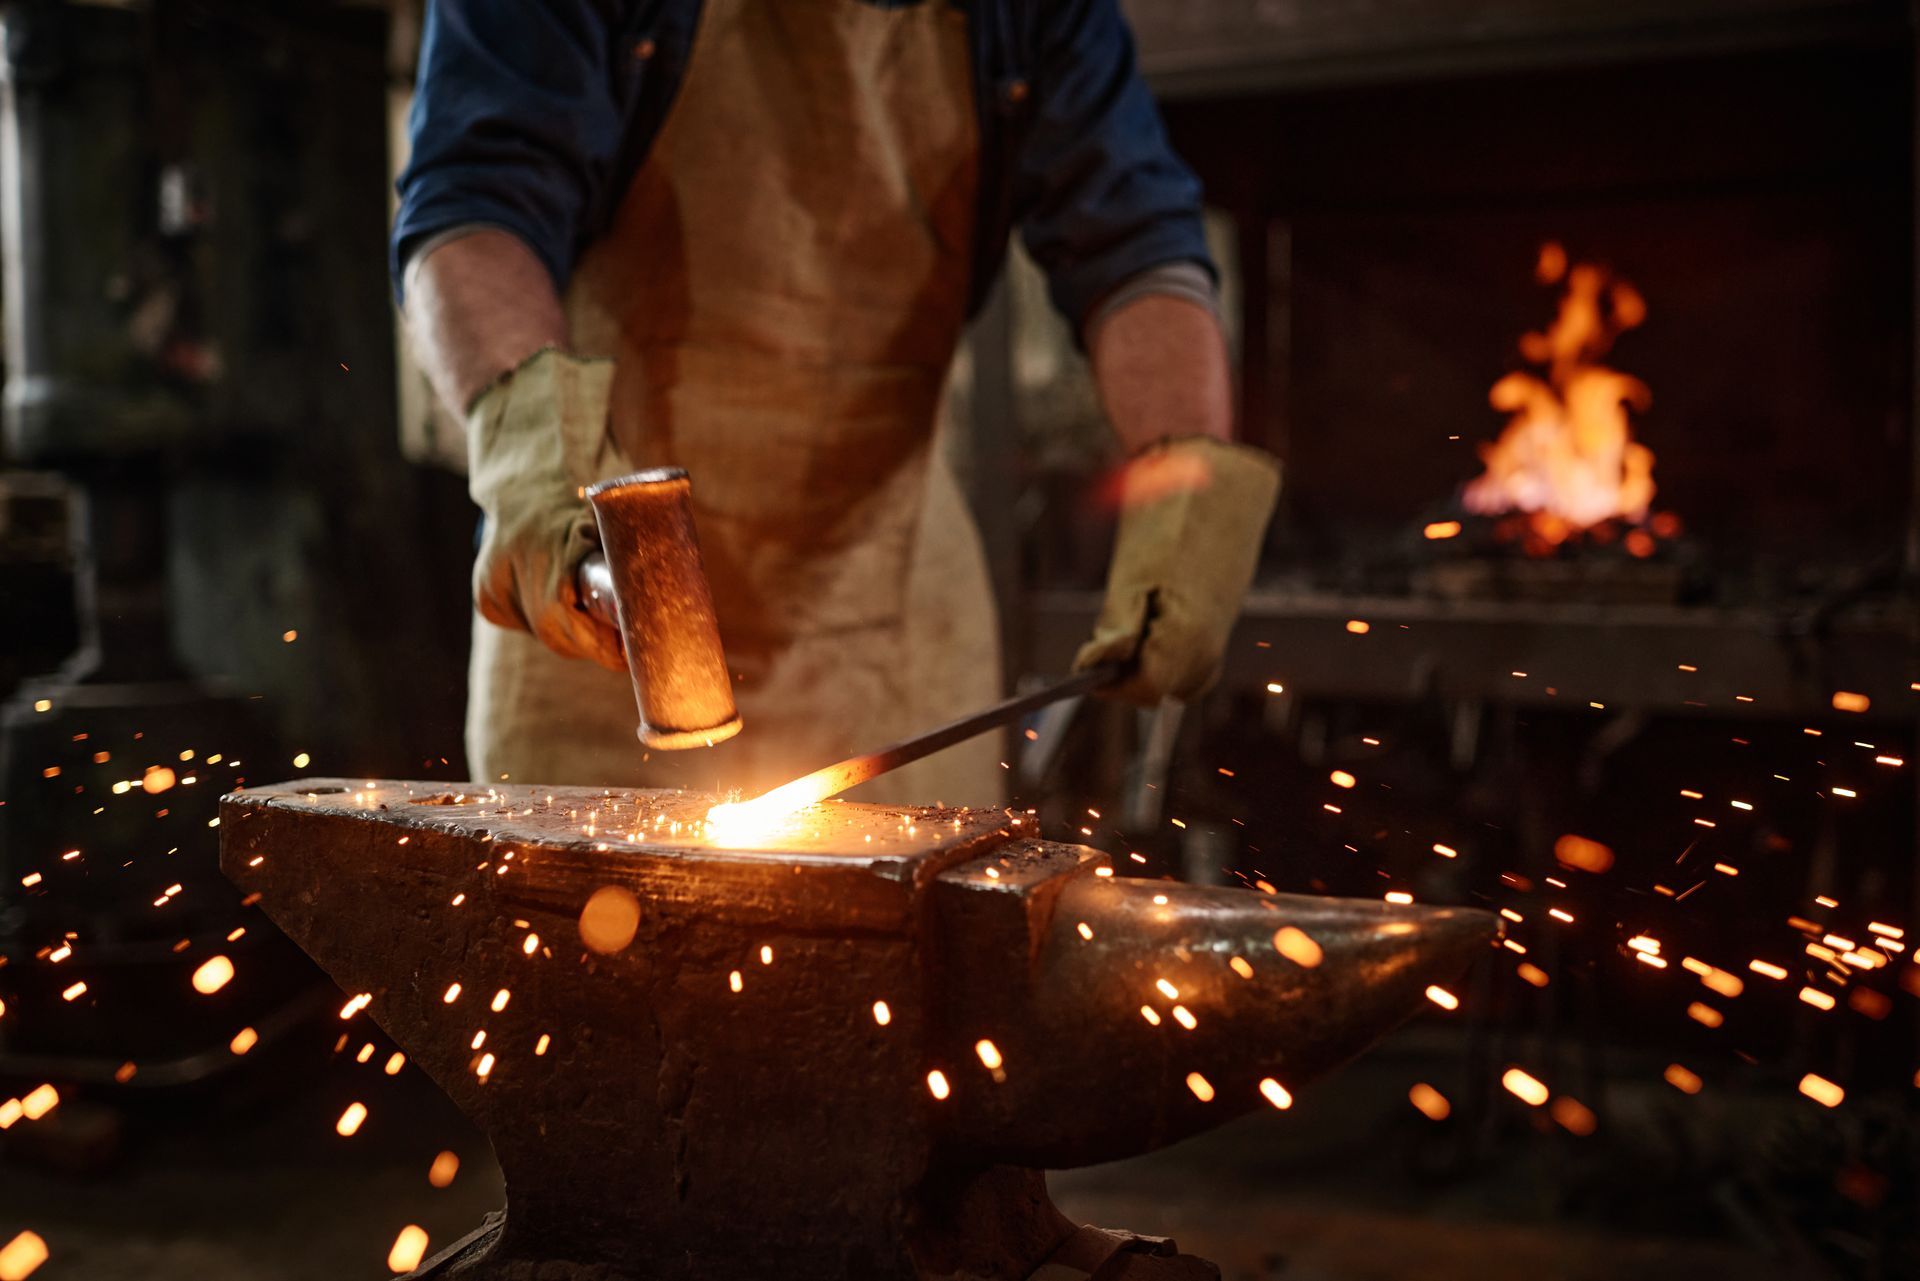 A blacksmith is working on a piece of metal on an anvil.